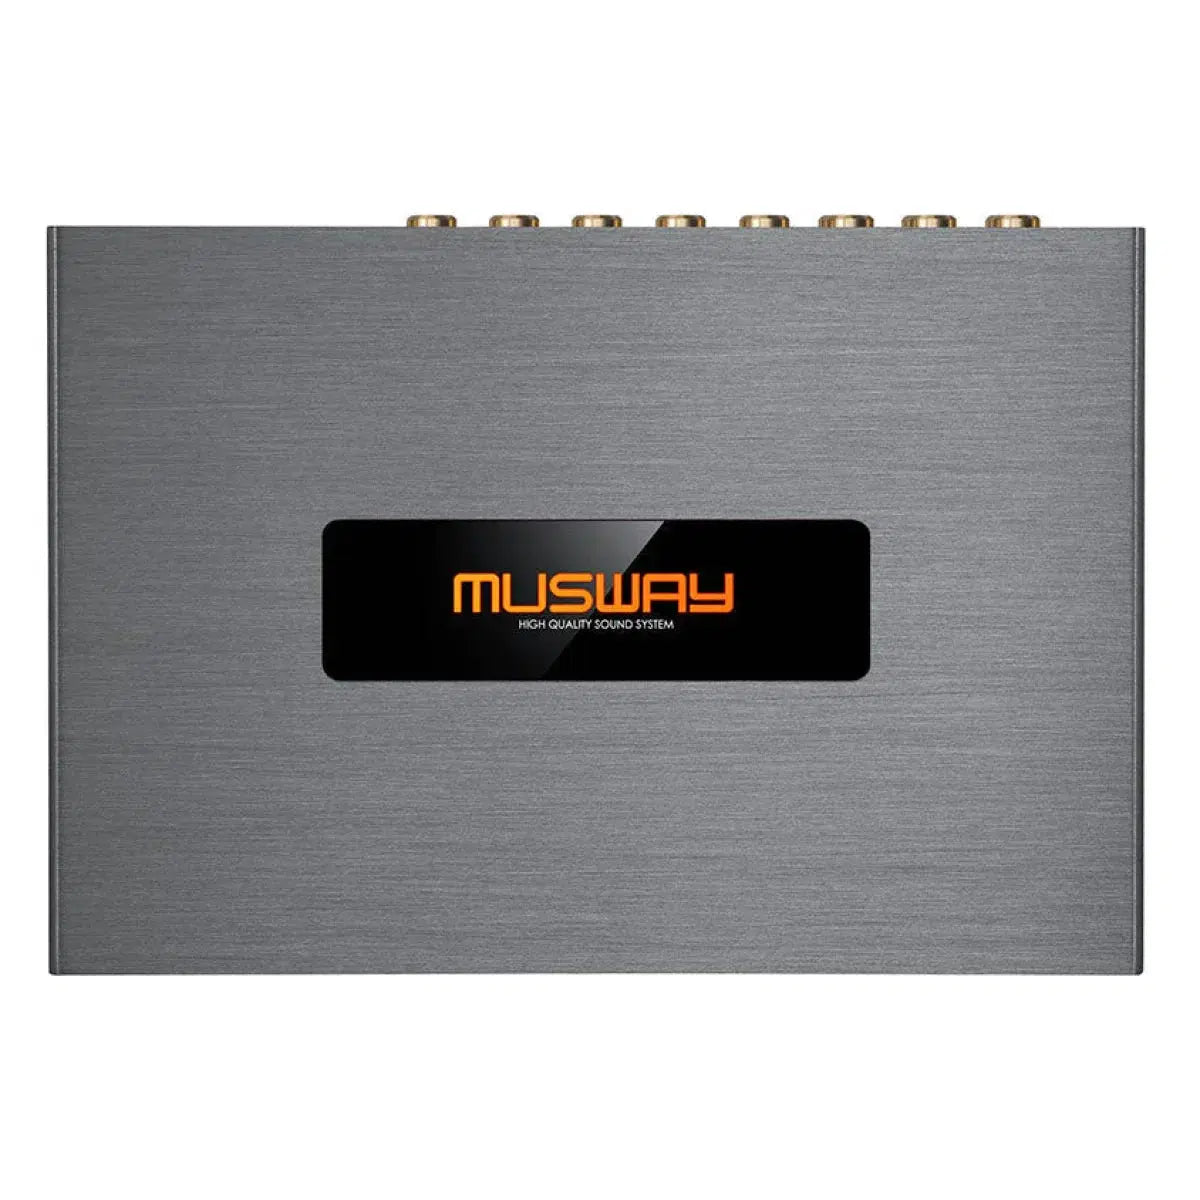 Musway-DSP68-8-canaux DSP-Masori.fr